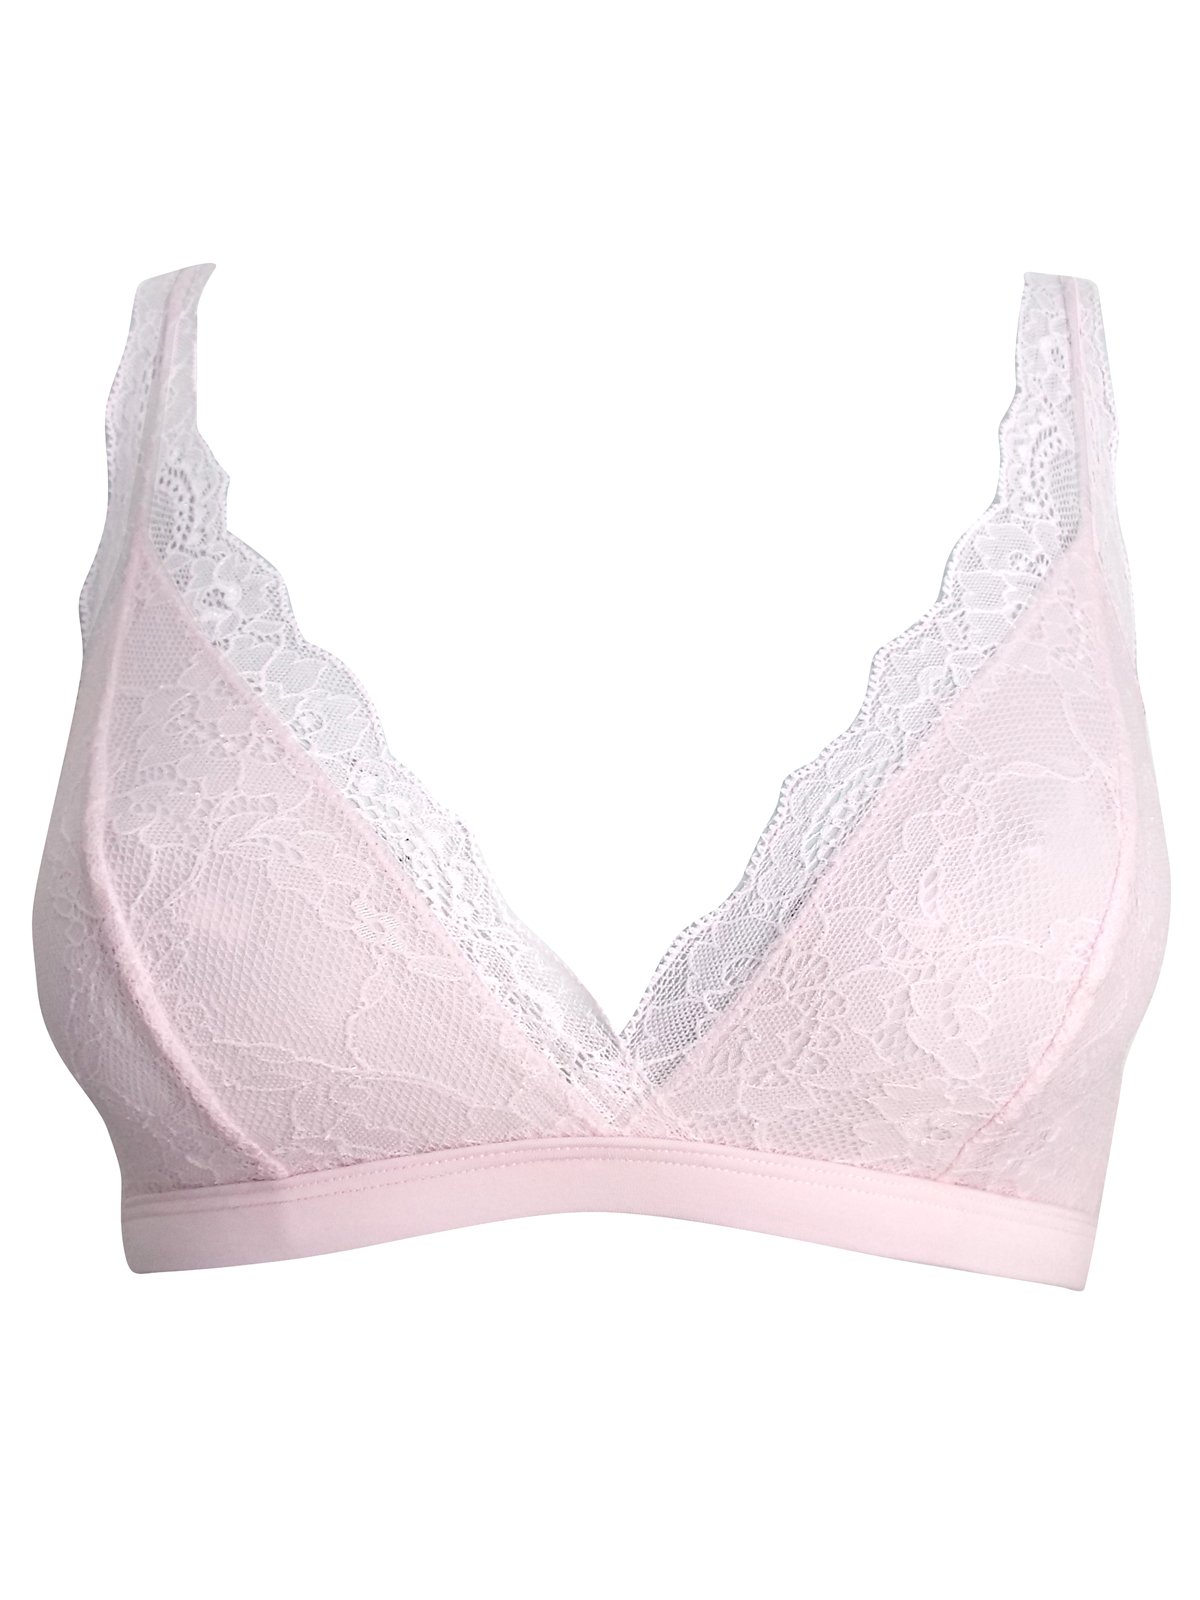 Wholesale Mothercare clothing and lingerie - - M0thercare PINK Non-Wired  Non-Padded Lace Maternity Bra - Size 8/10 to 20/22 (Sm